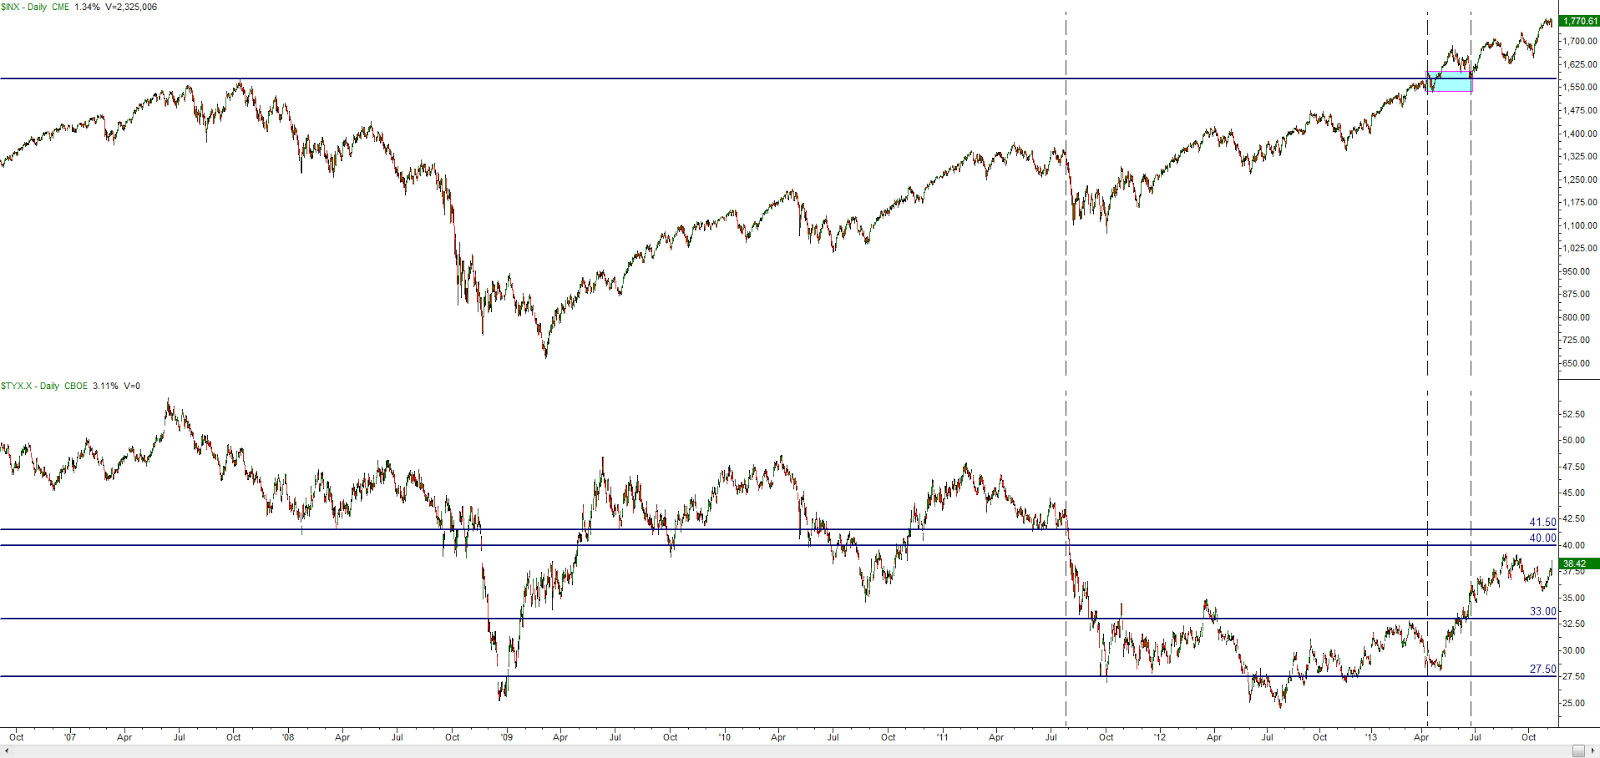  INX and 30 Year Daily